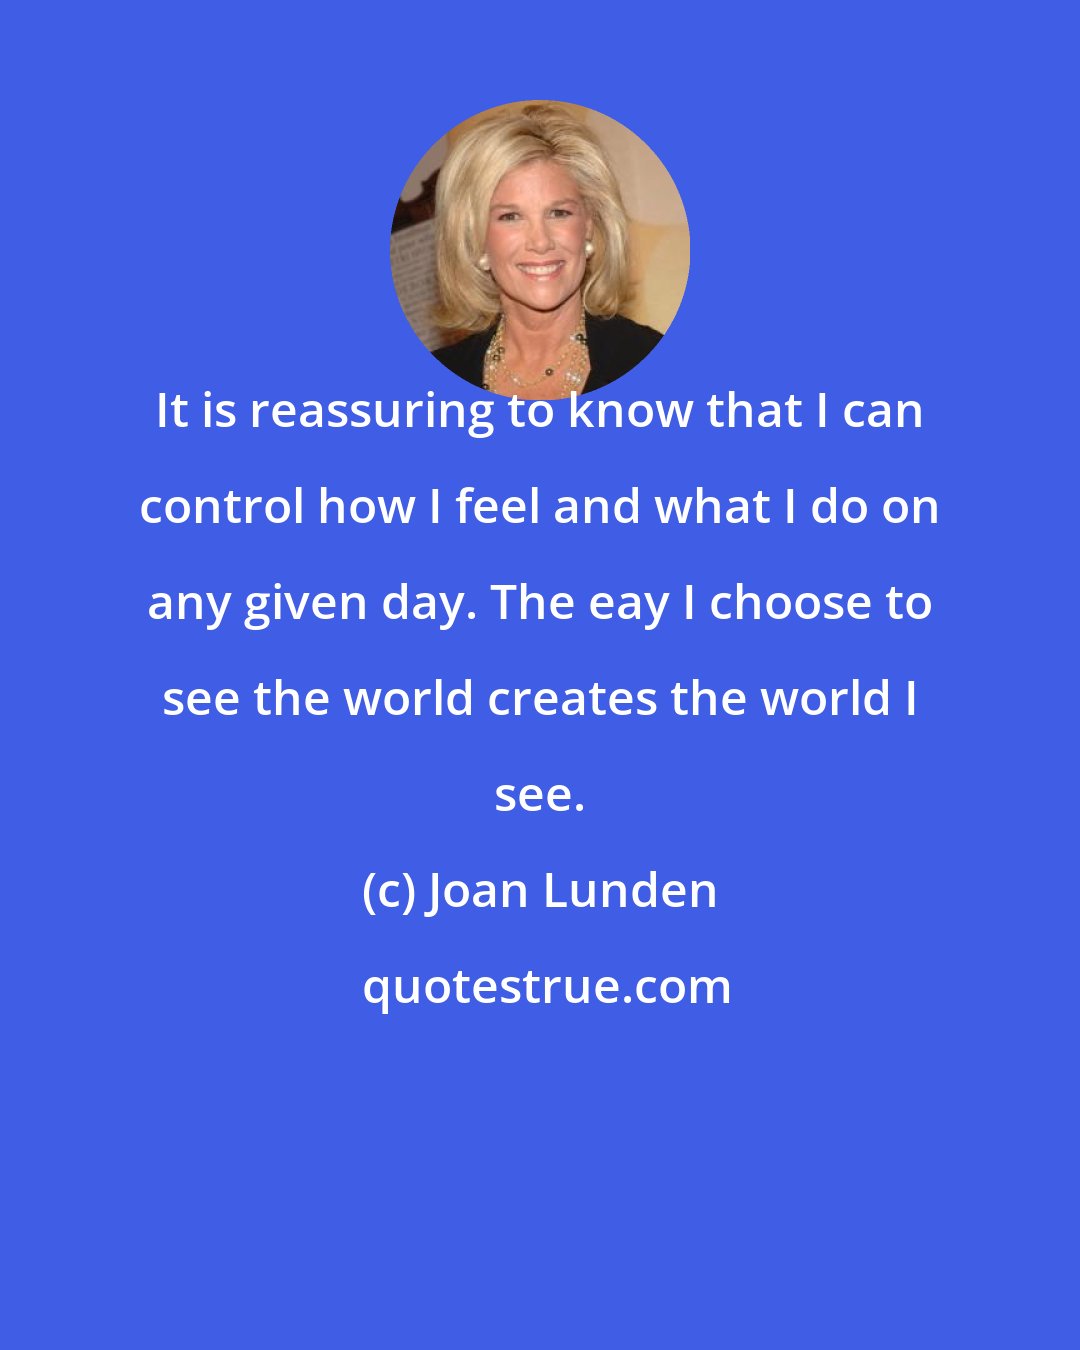 Joan Lunden: It is reassuring to know that I can control how I feel and what I do on any given day. The eay I choose to see the world creates the world I see.